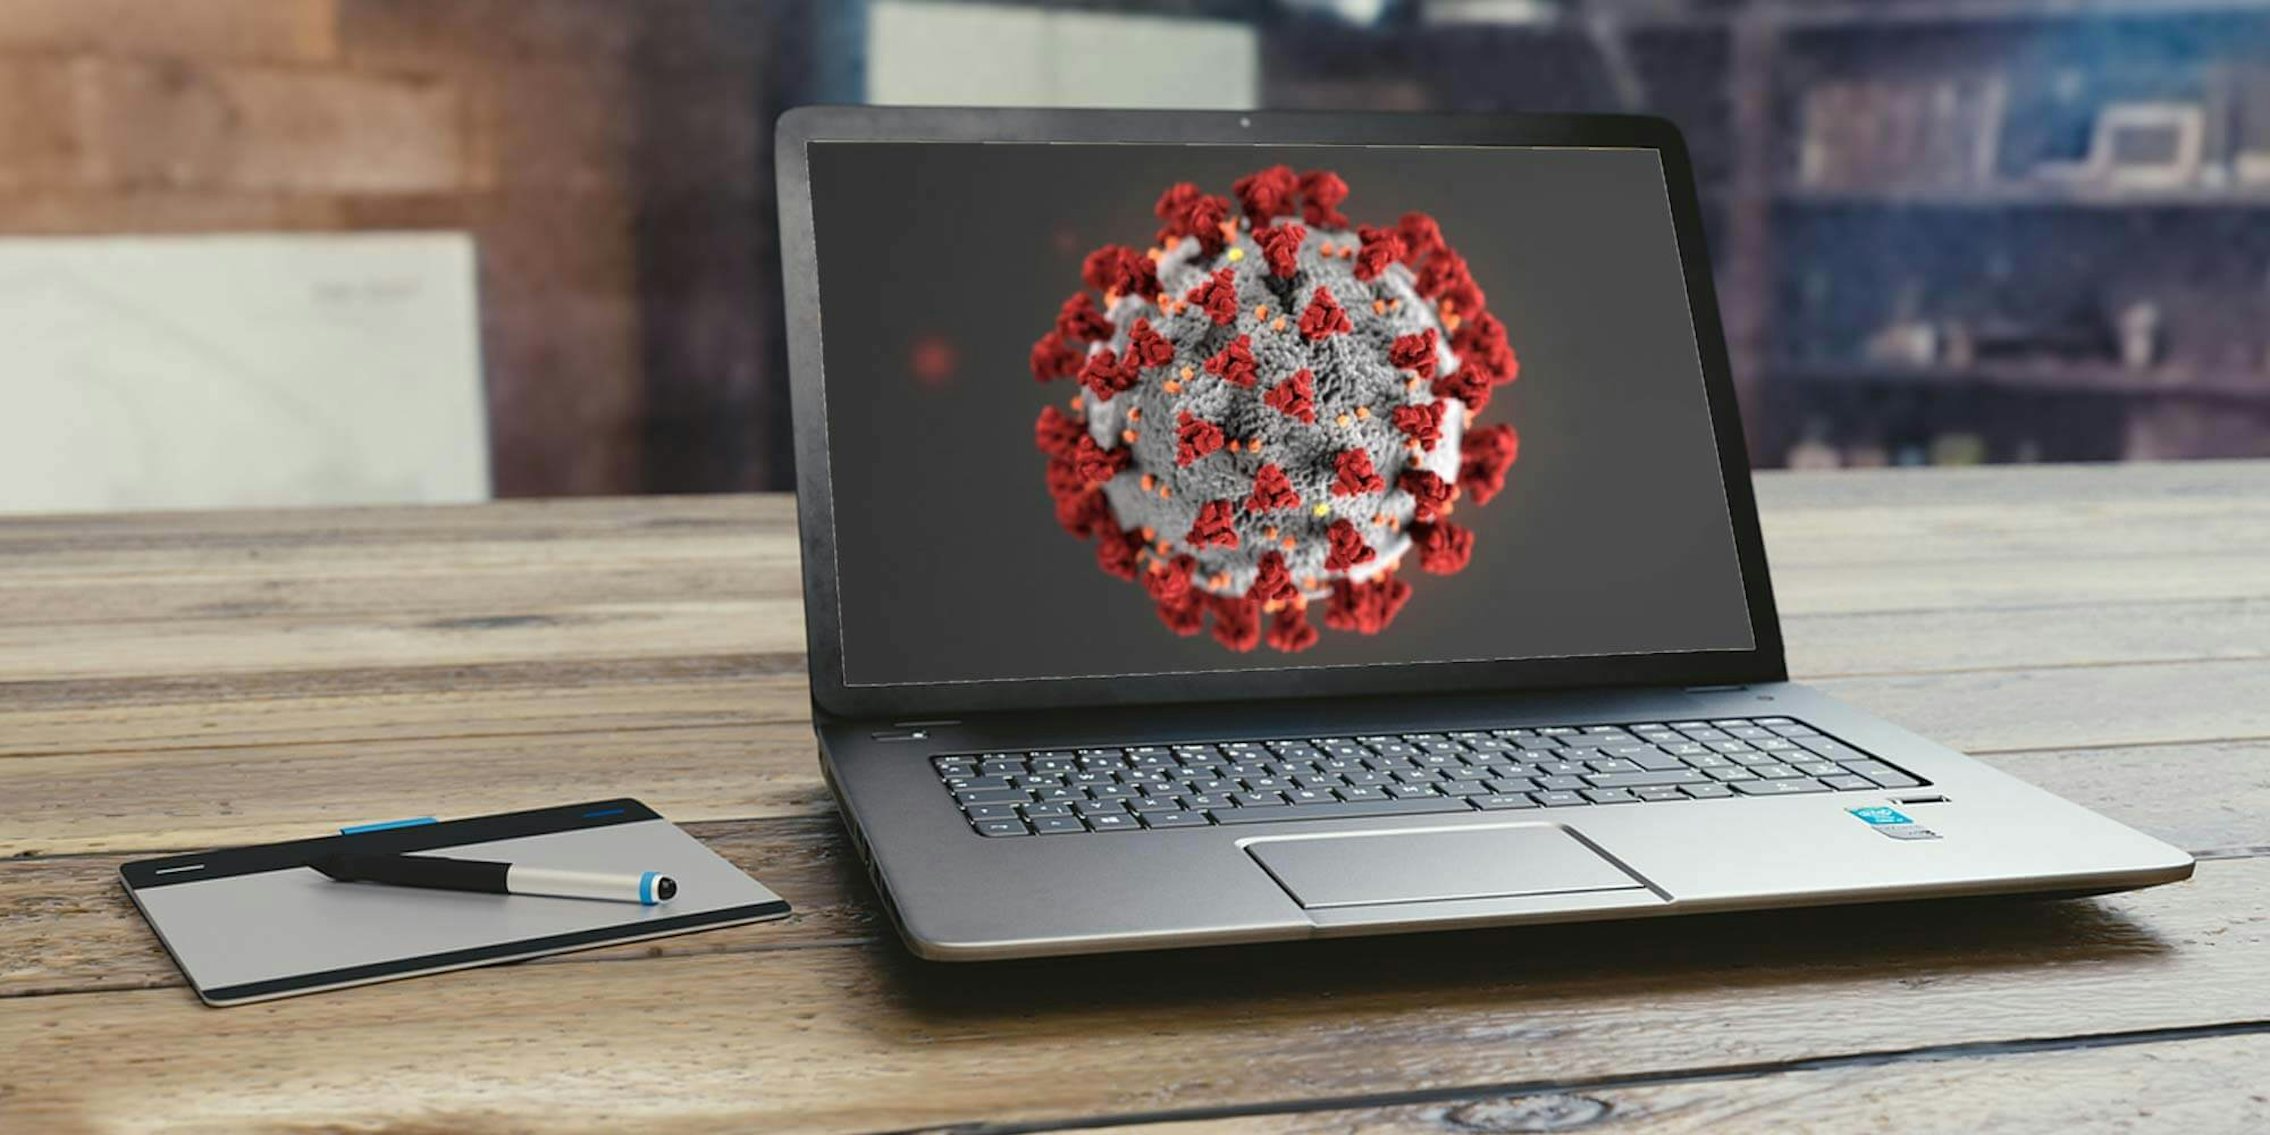 A laptop with an image of the coronavirus on its screen